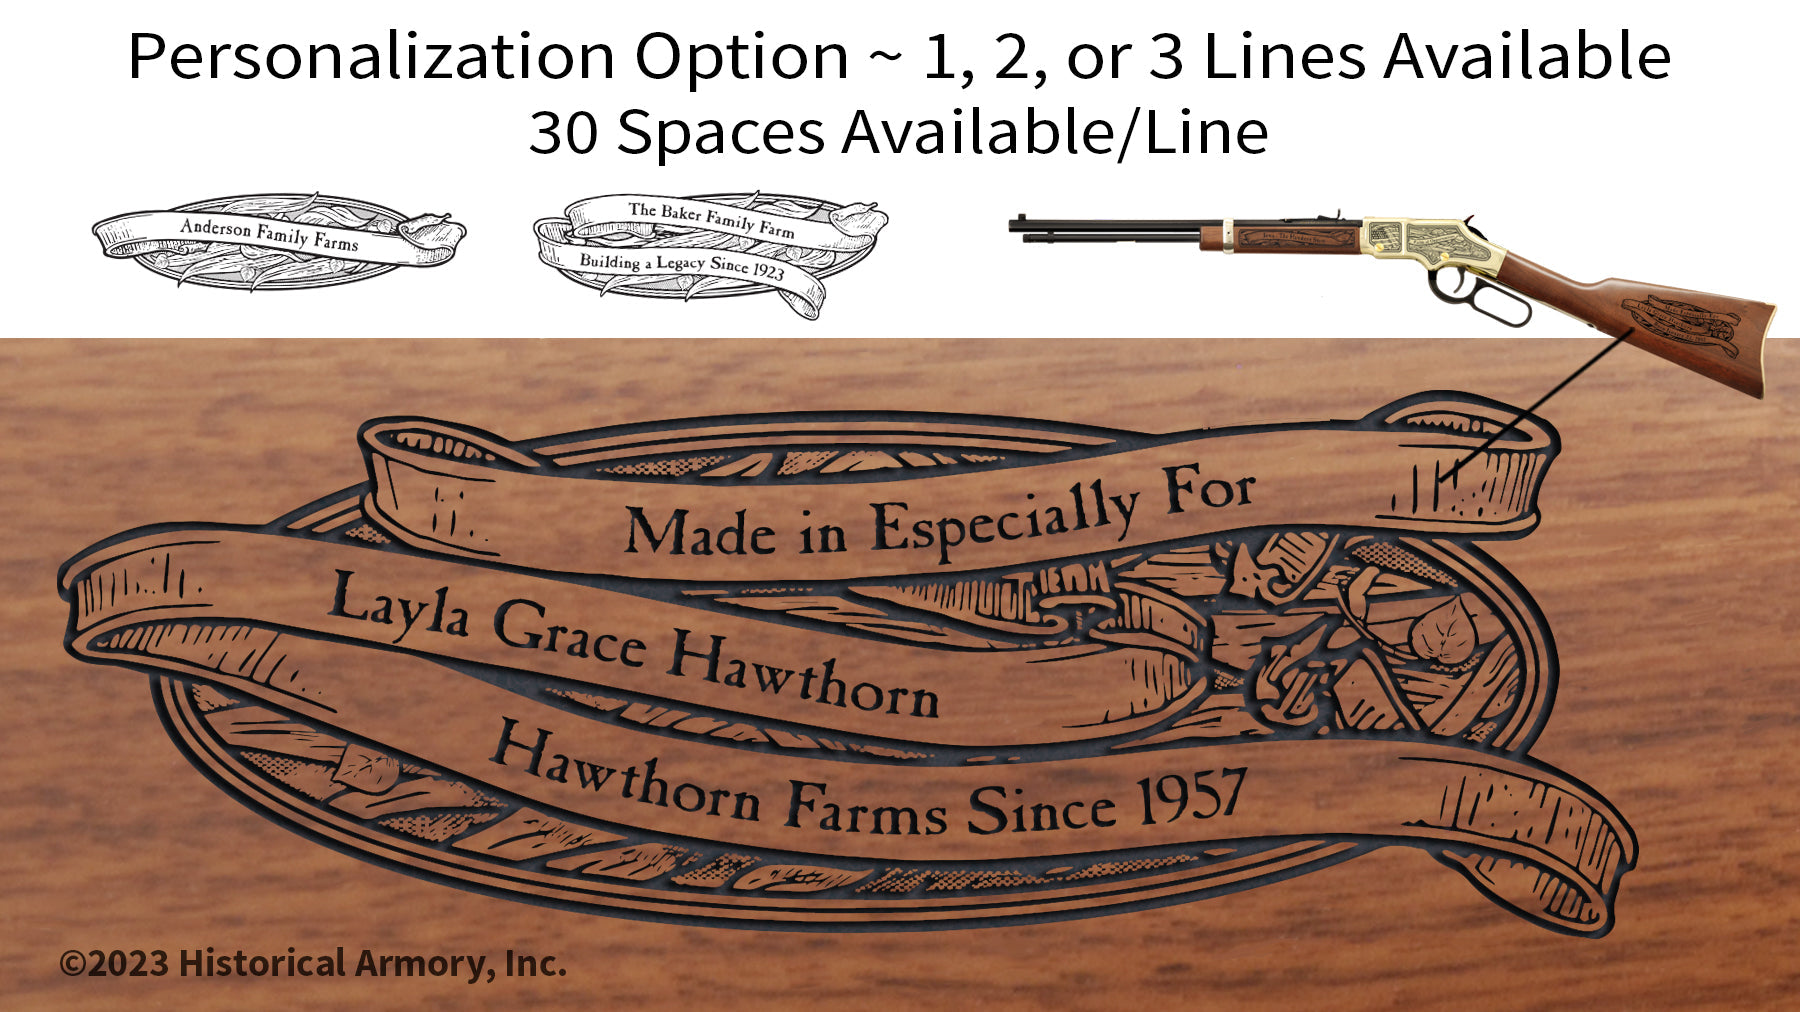 New Mexico Agricultural Heritage Engraved Rifle Personalization